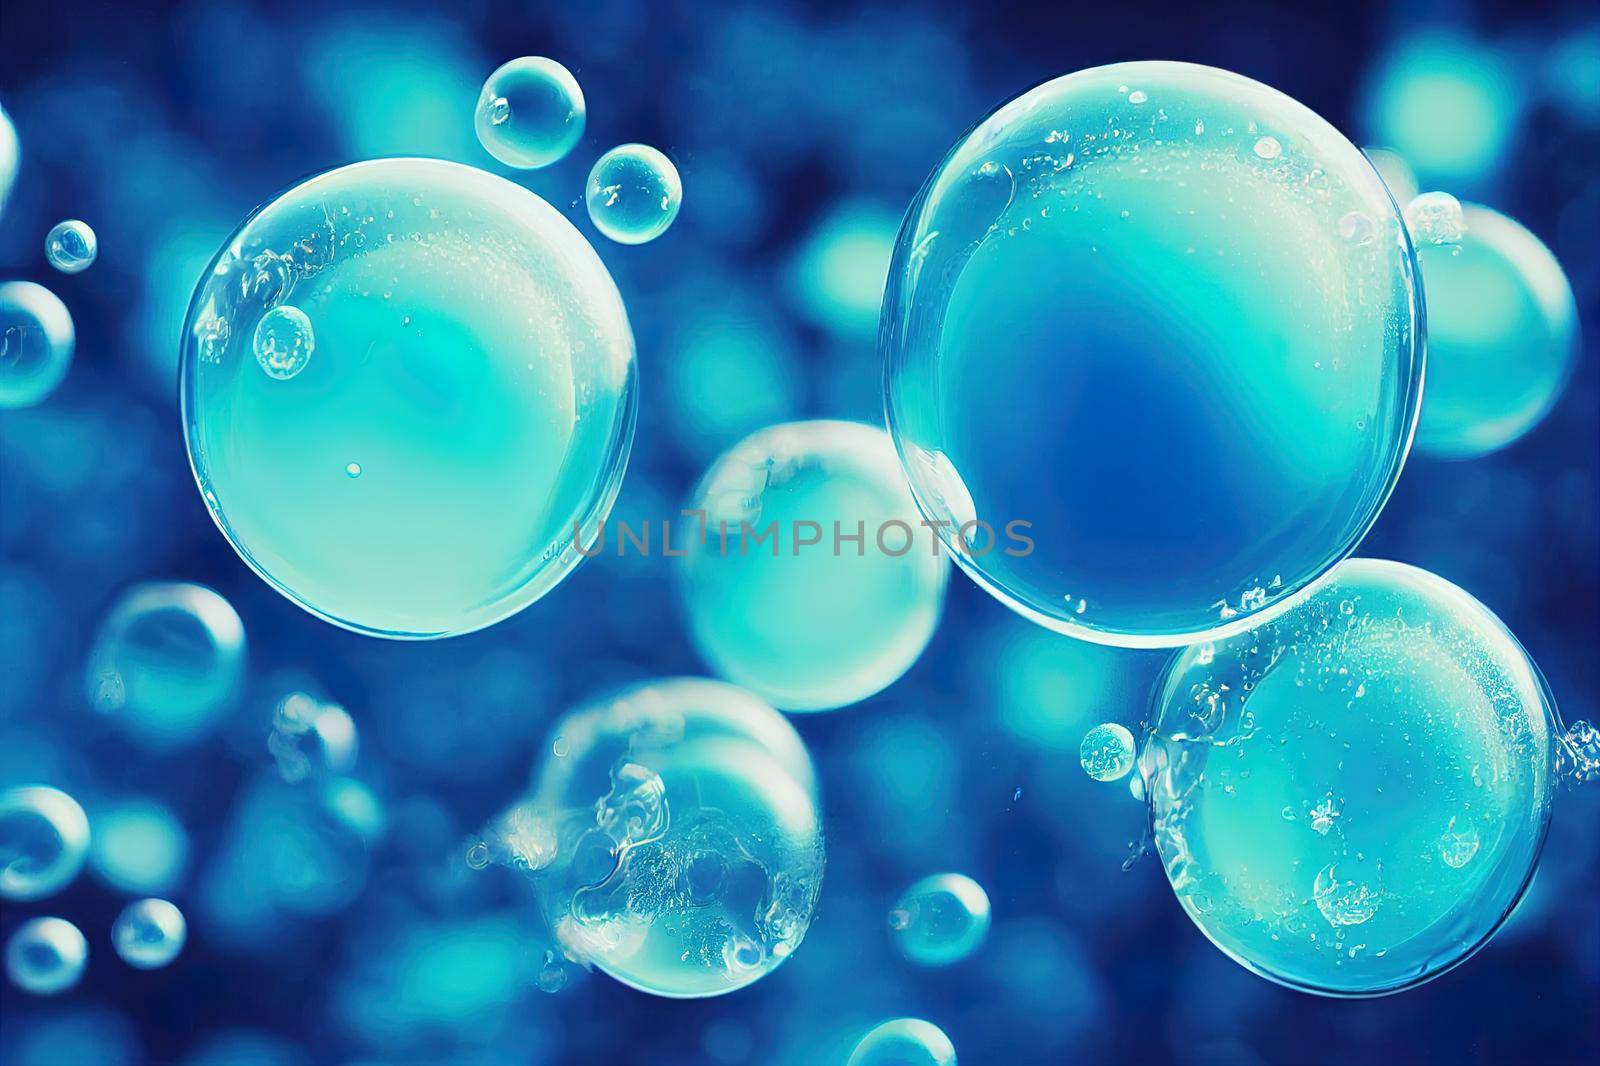 Effervescent fizz and clean cosmetics hygiene or rejuvenate renewable energy. Studio shot of transparent cosmetic blue gas bubbles under water in full frame macro close up with selective focus blur.